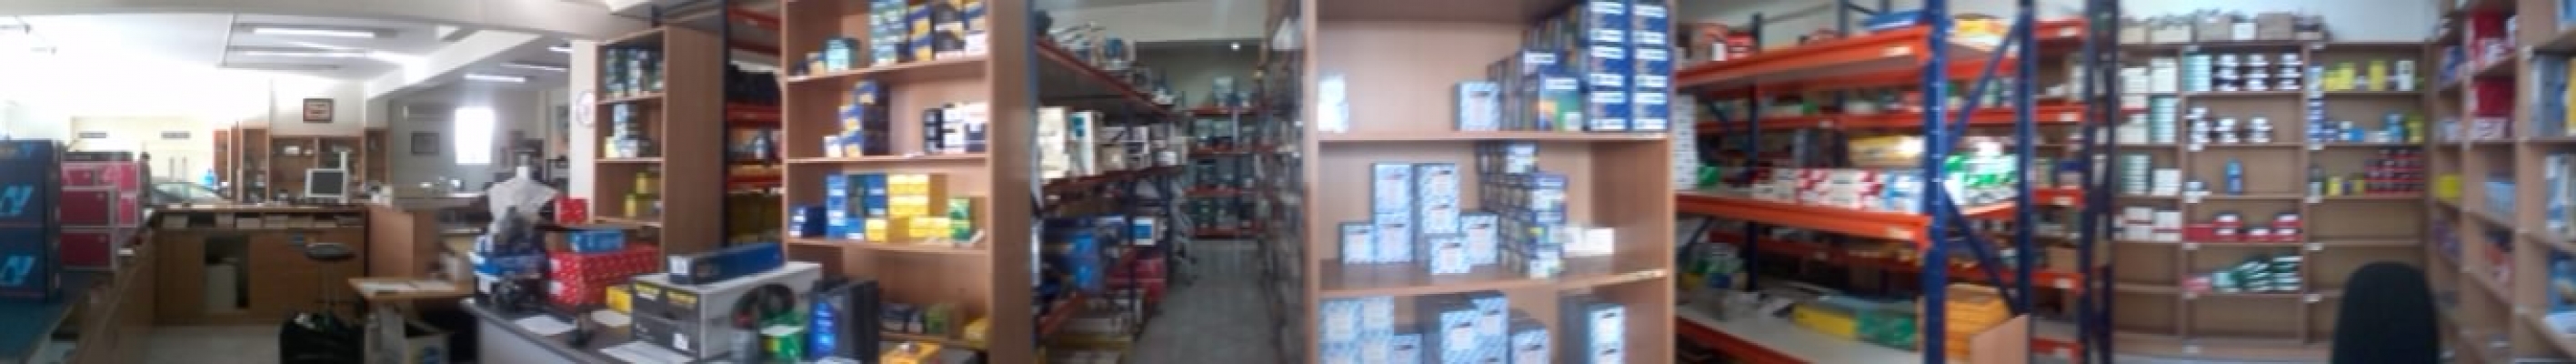 Store topsis 8